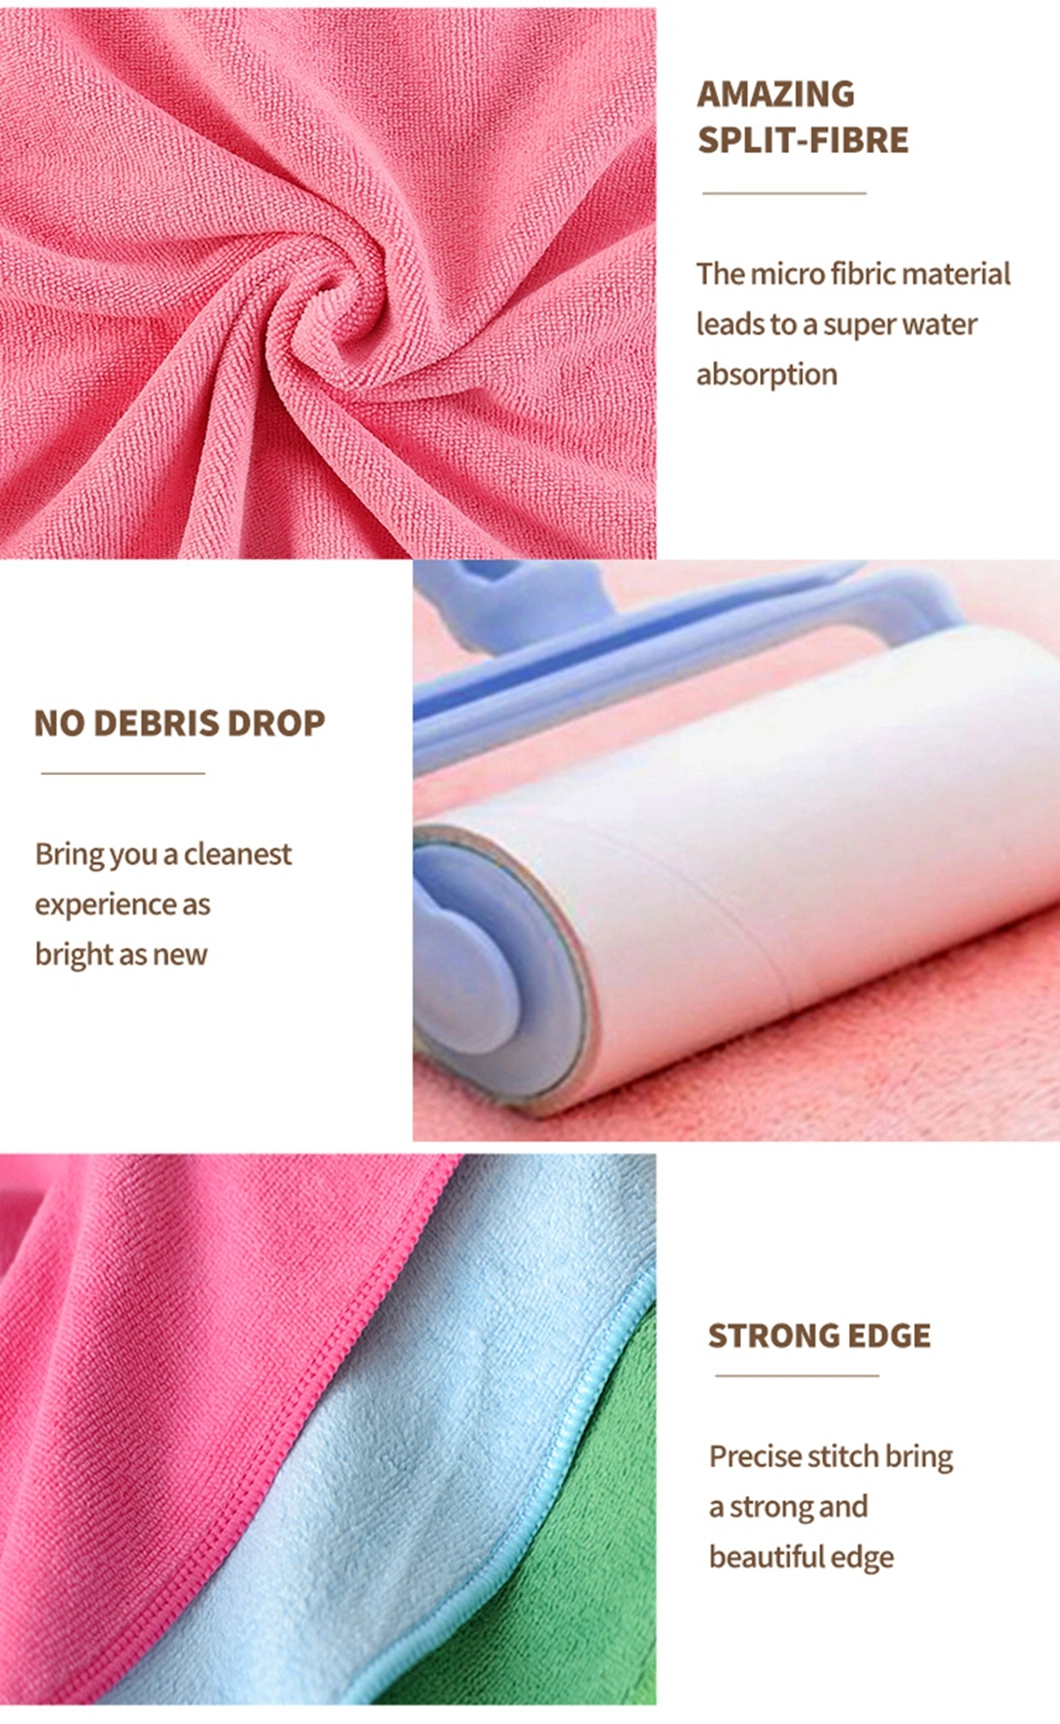 80%Polyester&20%Polyamide Microfibre Car Wash Drying Cloth Dish Kitchen Cleaning Cloth Microfiber Towel